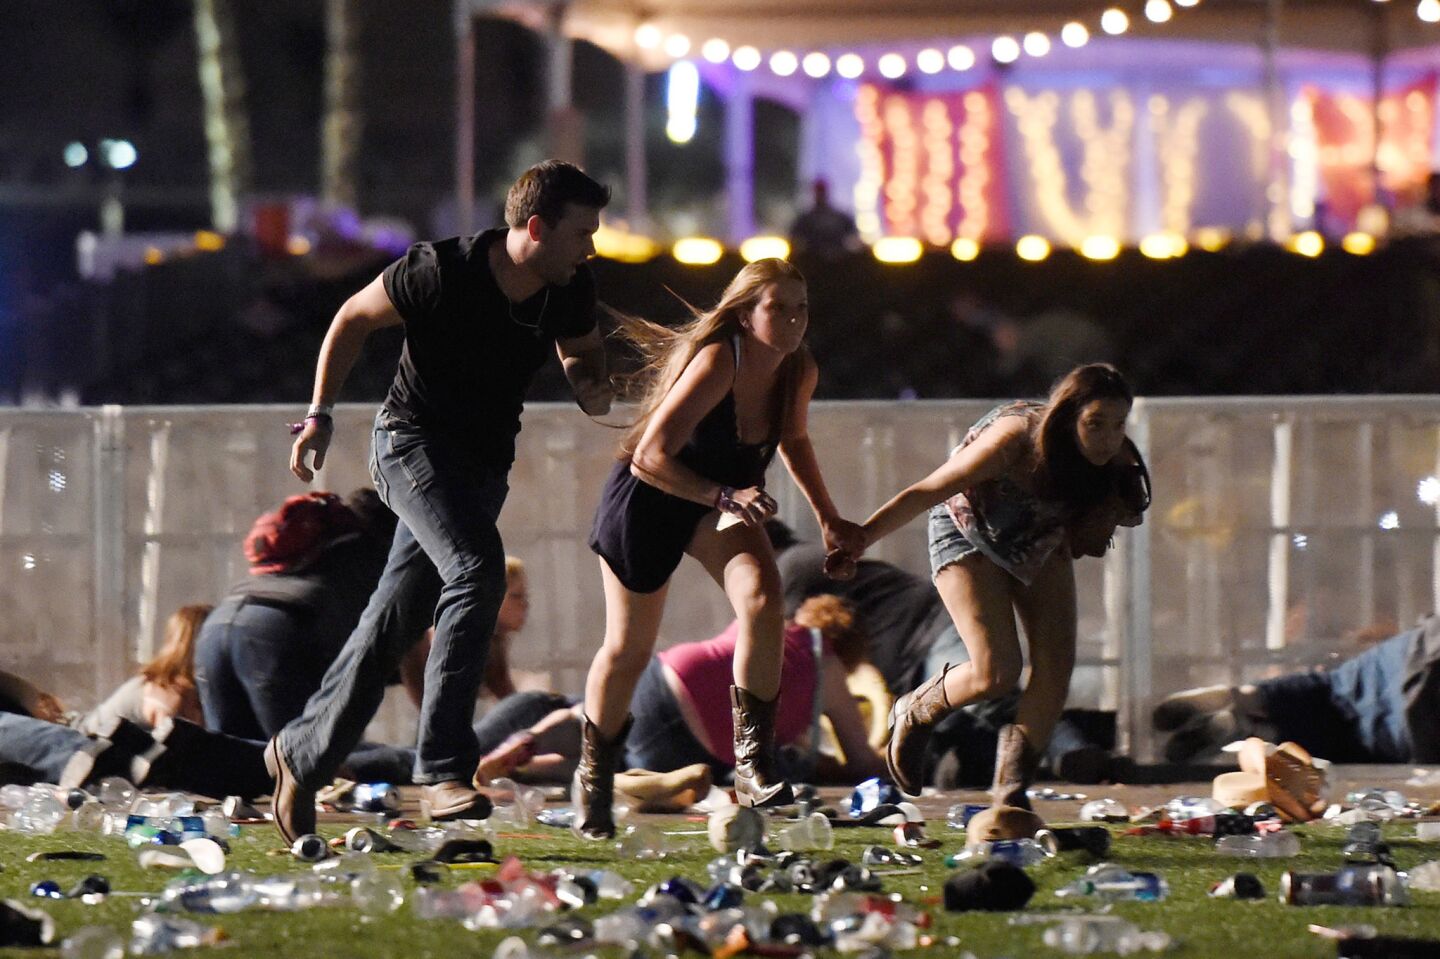 People run from the Route 91 Harvest country music festival after hearing gunfire Sunday night in Las Vegas. The shooter was firing from the Mandalay Bay Resort and Casino.